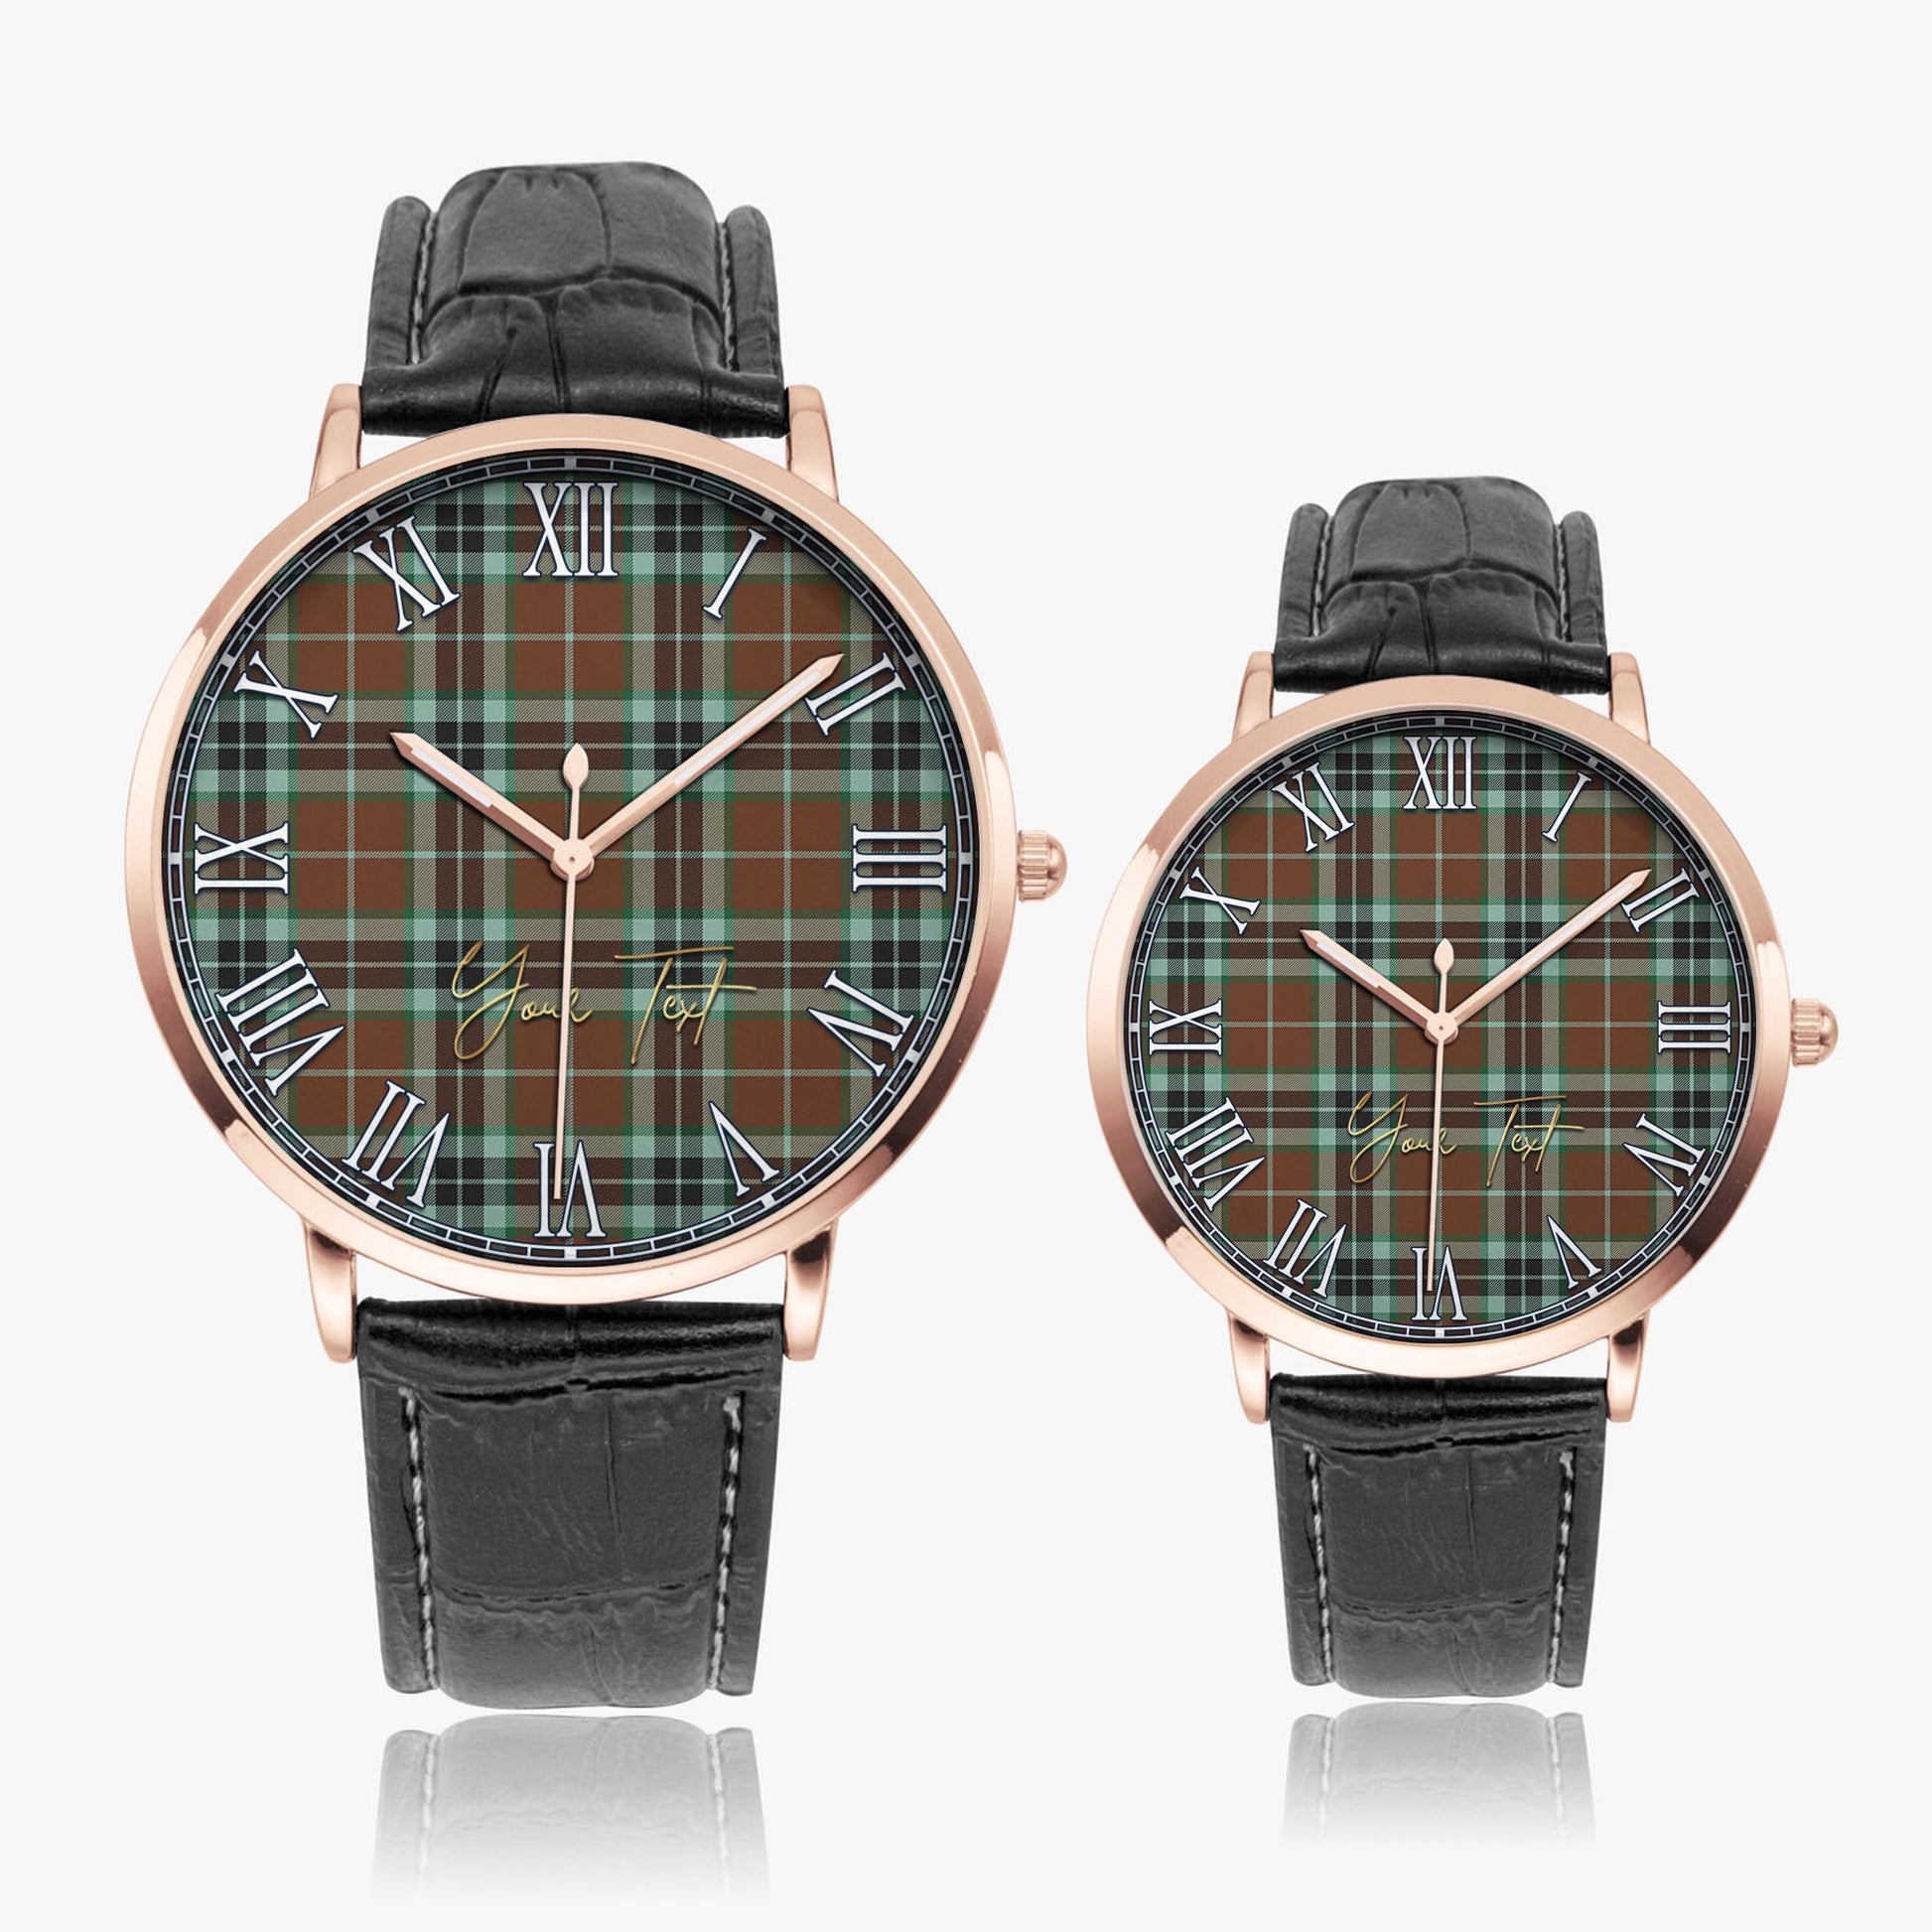 Thomson Hunting Modern Tartan Personalized Your Text Leather Trap Quartz Watch Ultra Thin Rose Gold Case With Black Leather Strap - Tartanvibesclothing Shop